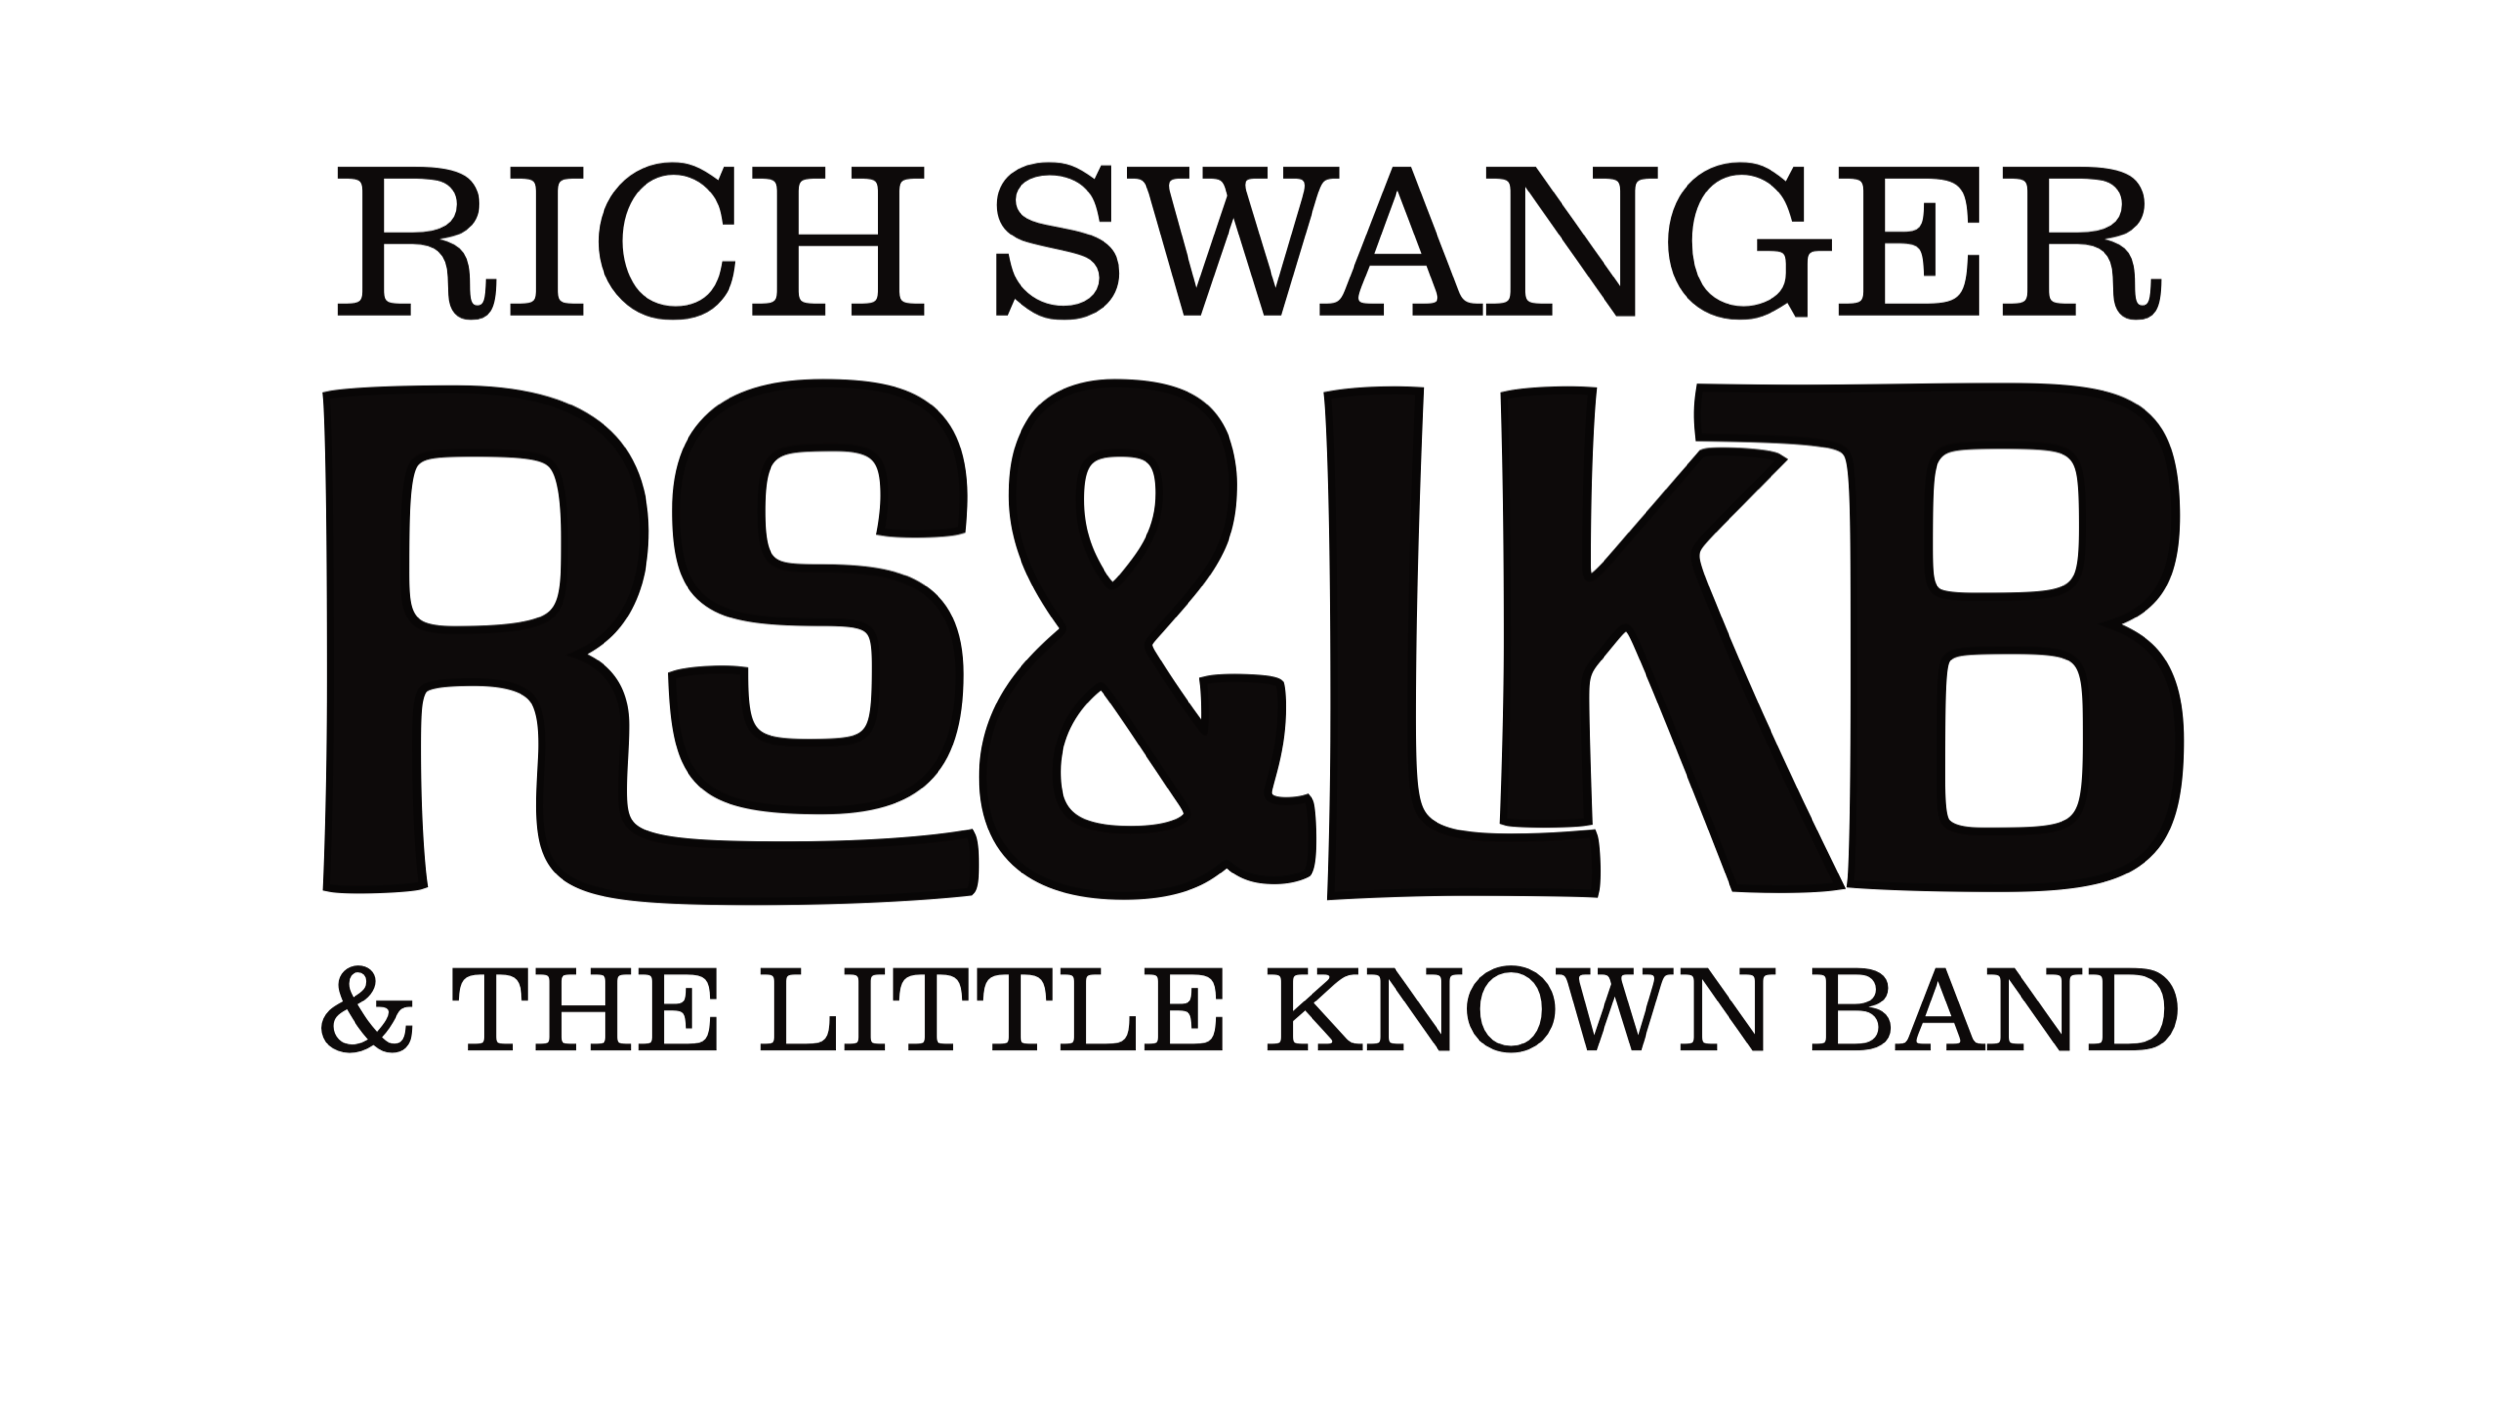 RICH SWANGER &amp; THE LITTLE KNOWN BAND